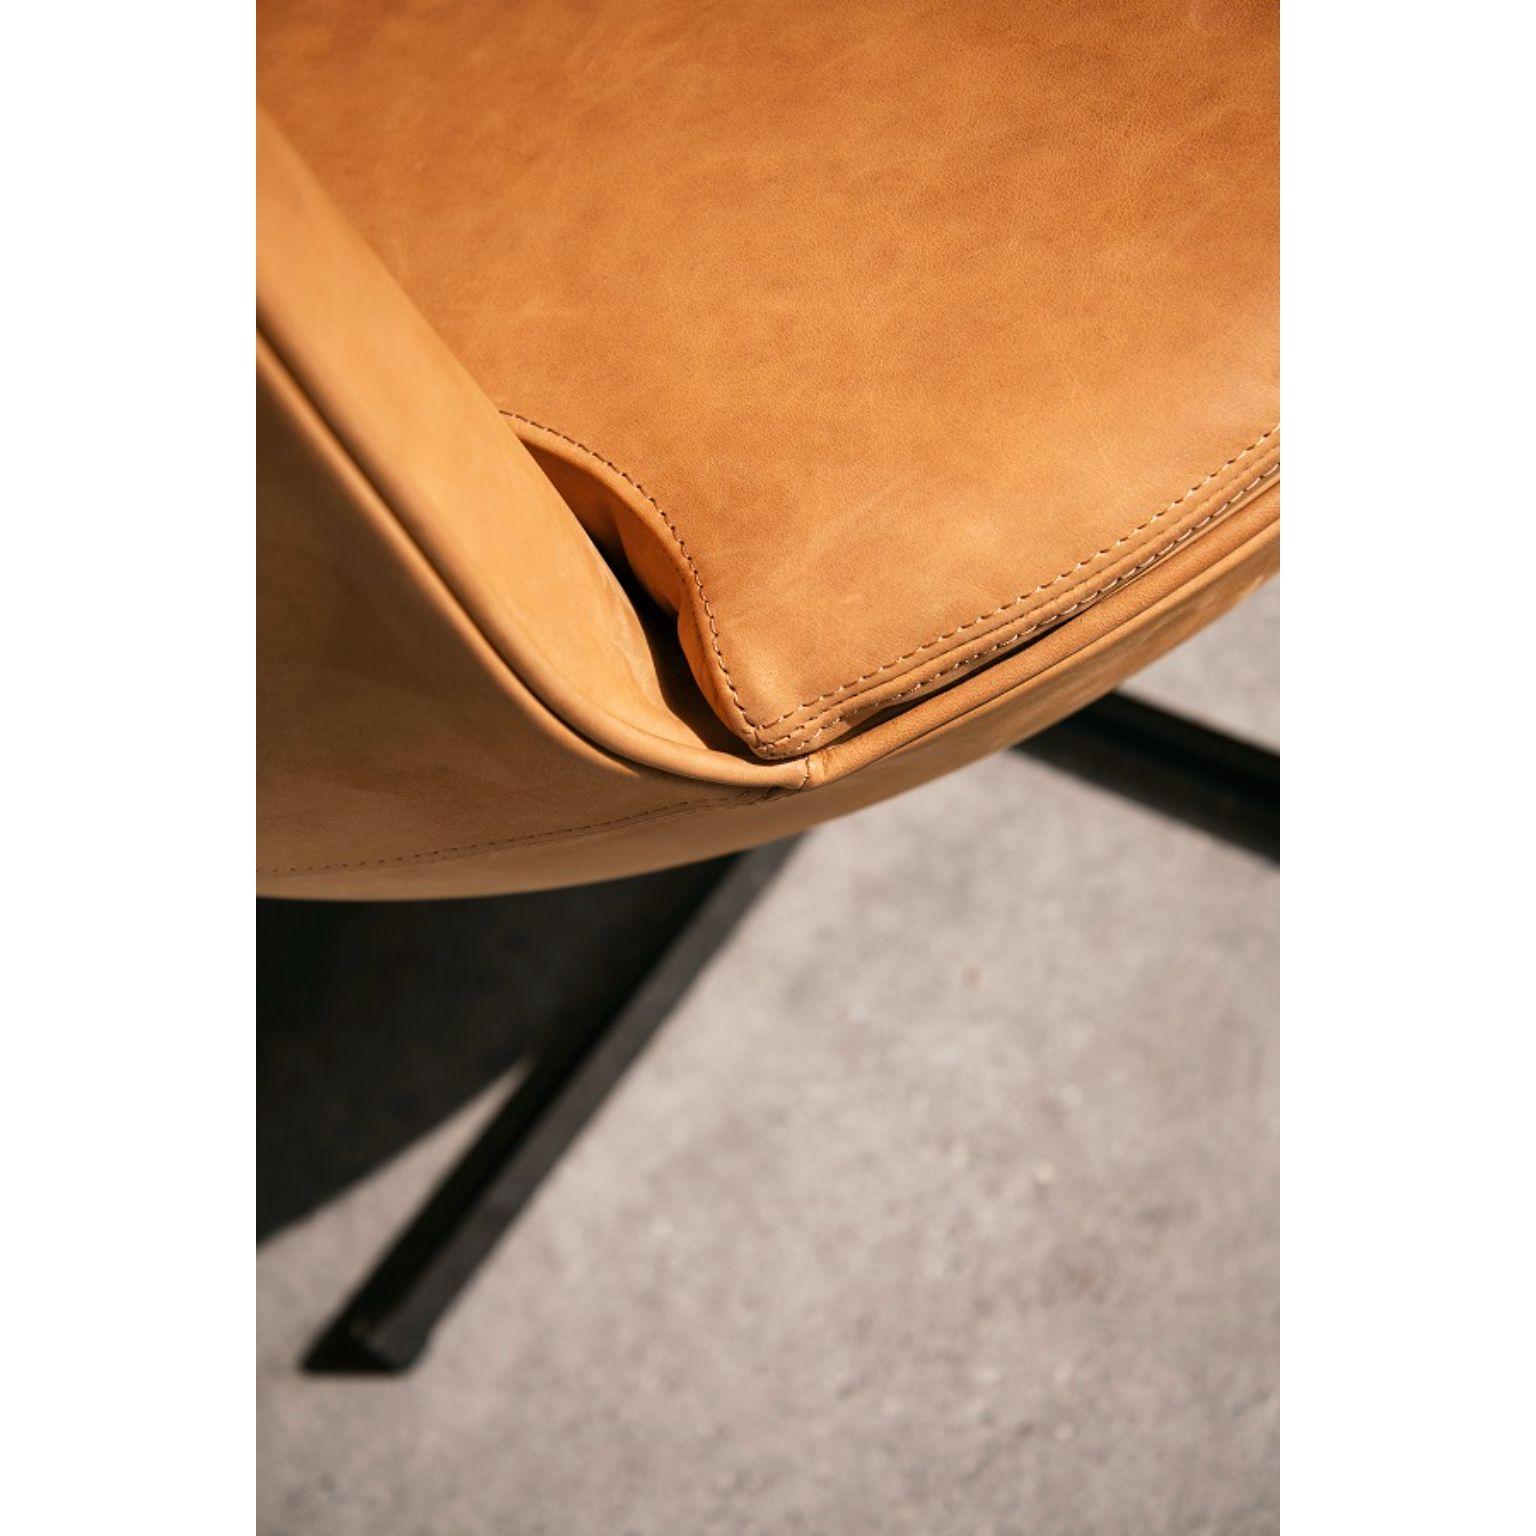 Calice Armchair by Patrick Norguet 3